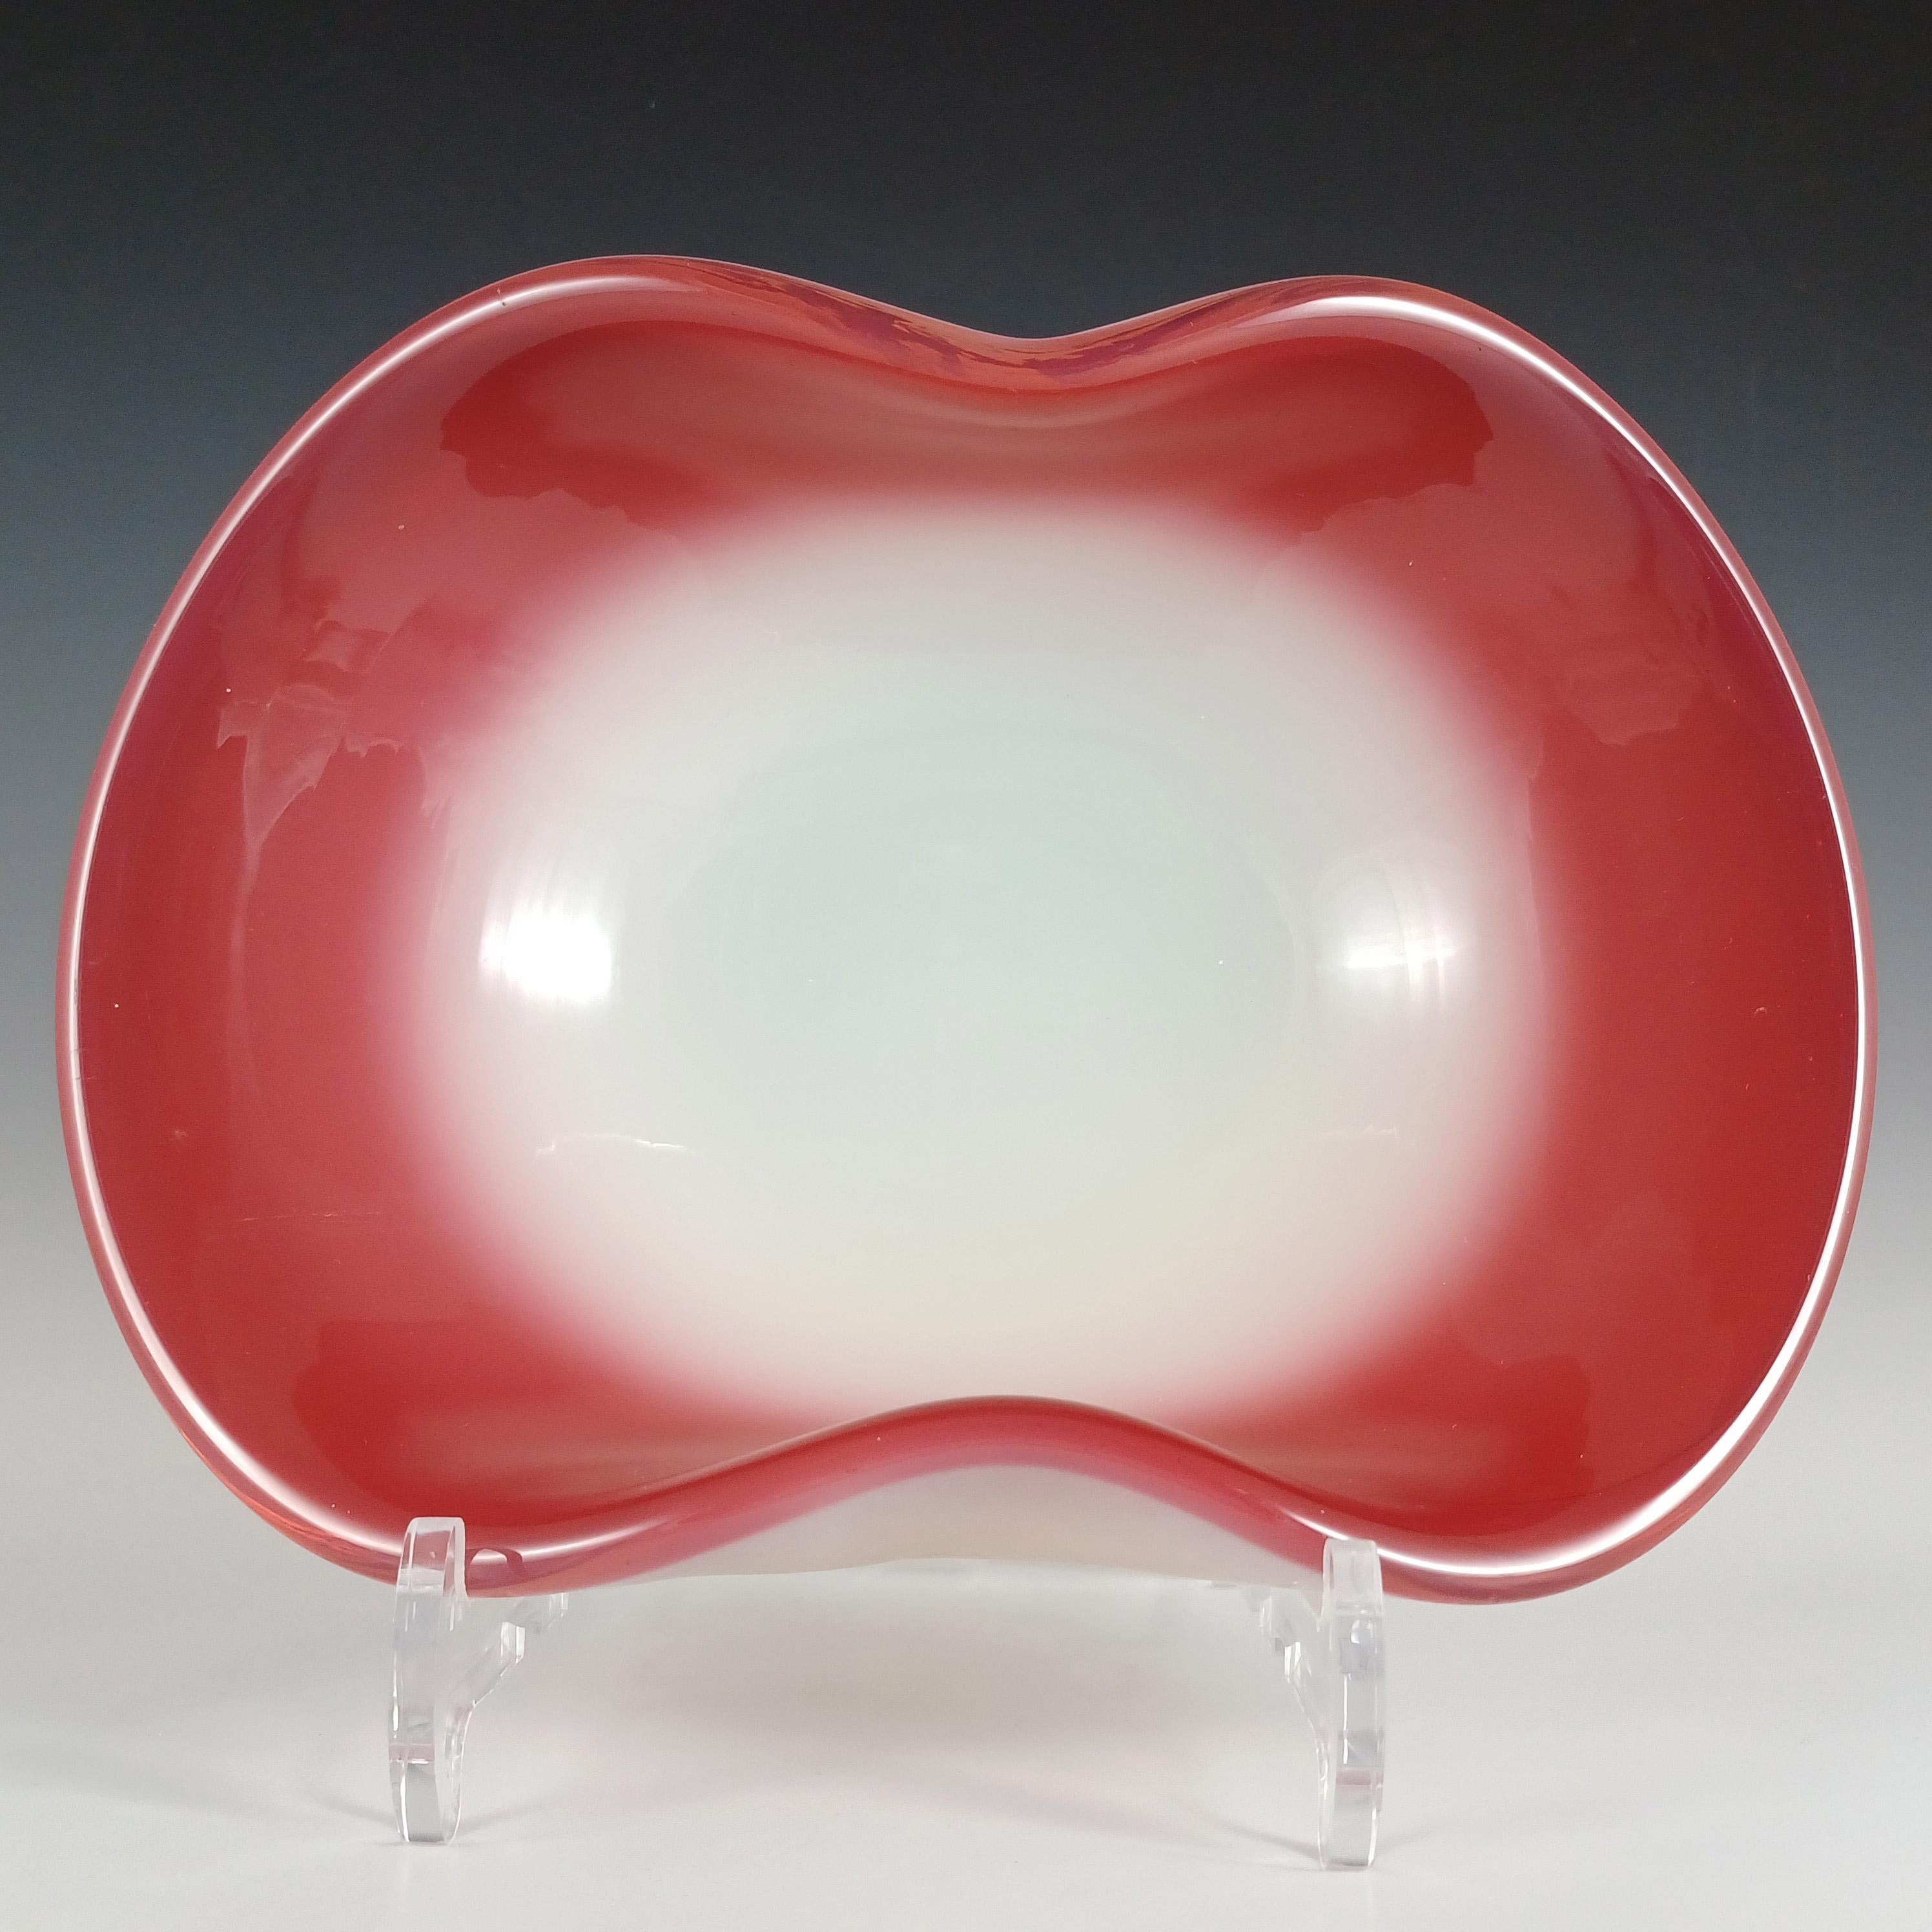 This is a magnificent large and heavy (1.5kg unpacked) 1950/60's Venetian biomorphic glass bowl, made on the island of Murano, near Venice, Italy. In a stunning combination of opaque pink and opalescent white glass. Attributed to Galliano Ferro, as